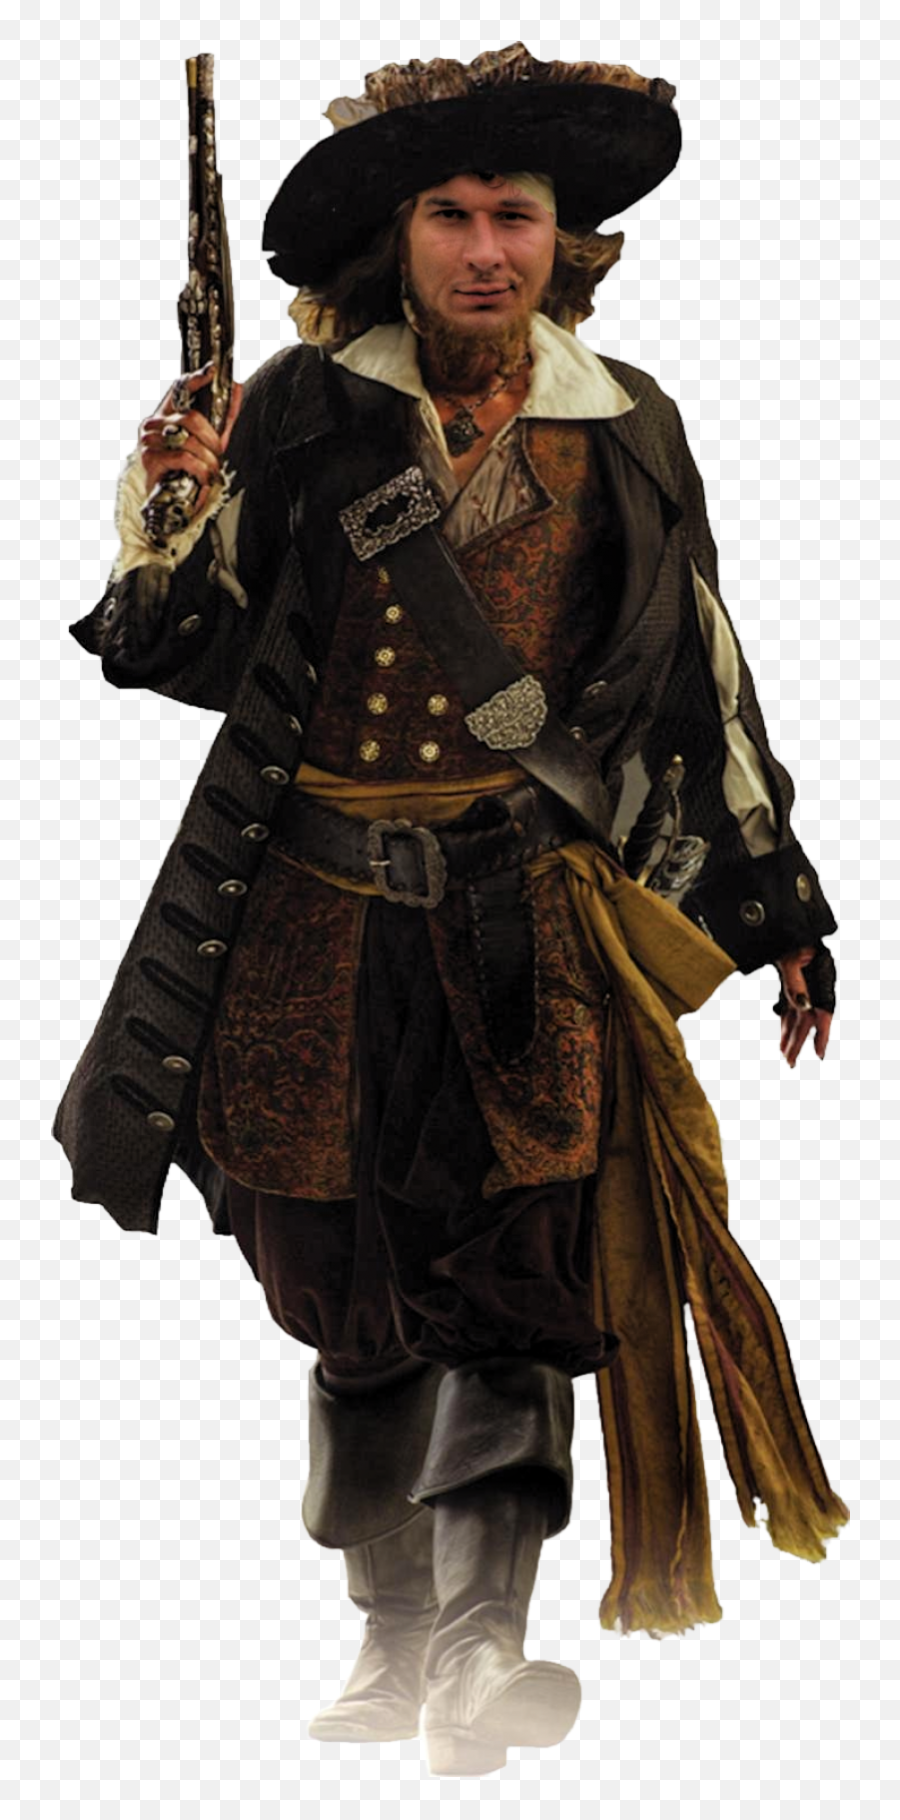 Pirate Png Image - Purepng Free Transparent Cc0 Png Image Pirates Of The Caribbean Barbossa Outfit,Pirate Transparent